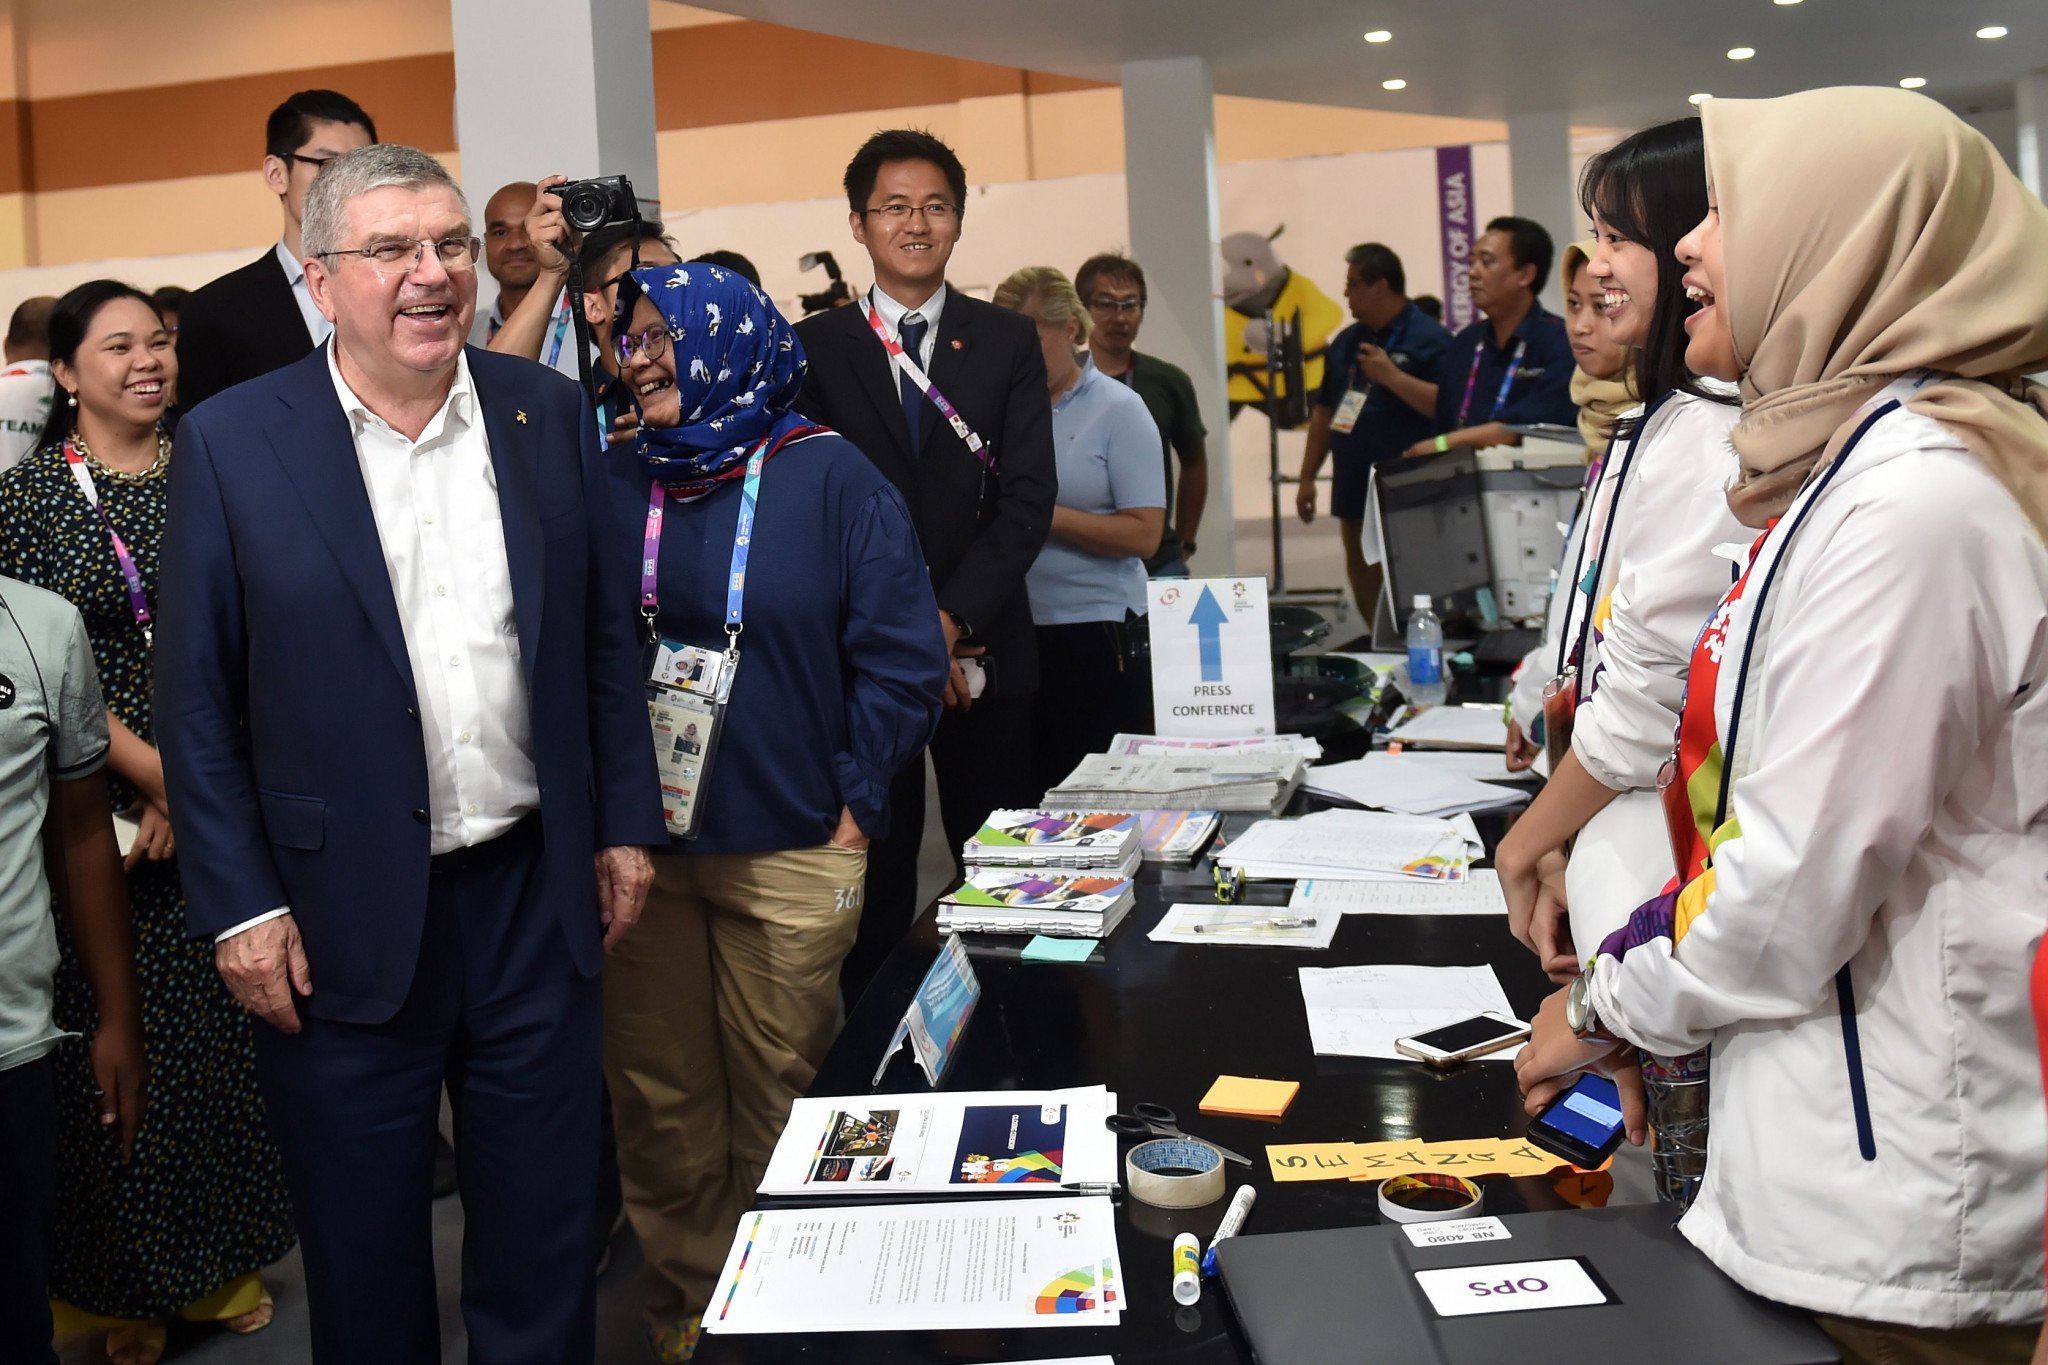 While visiting the 2018 Asian Games IOC President Thomas Bach claimed Indonesia could be a 